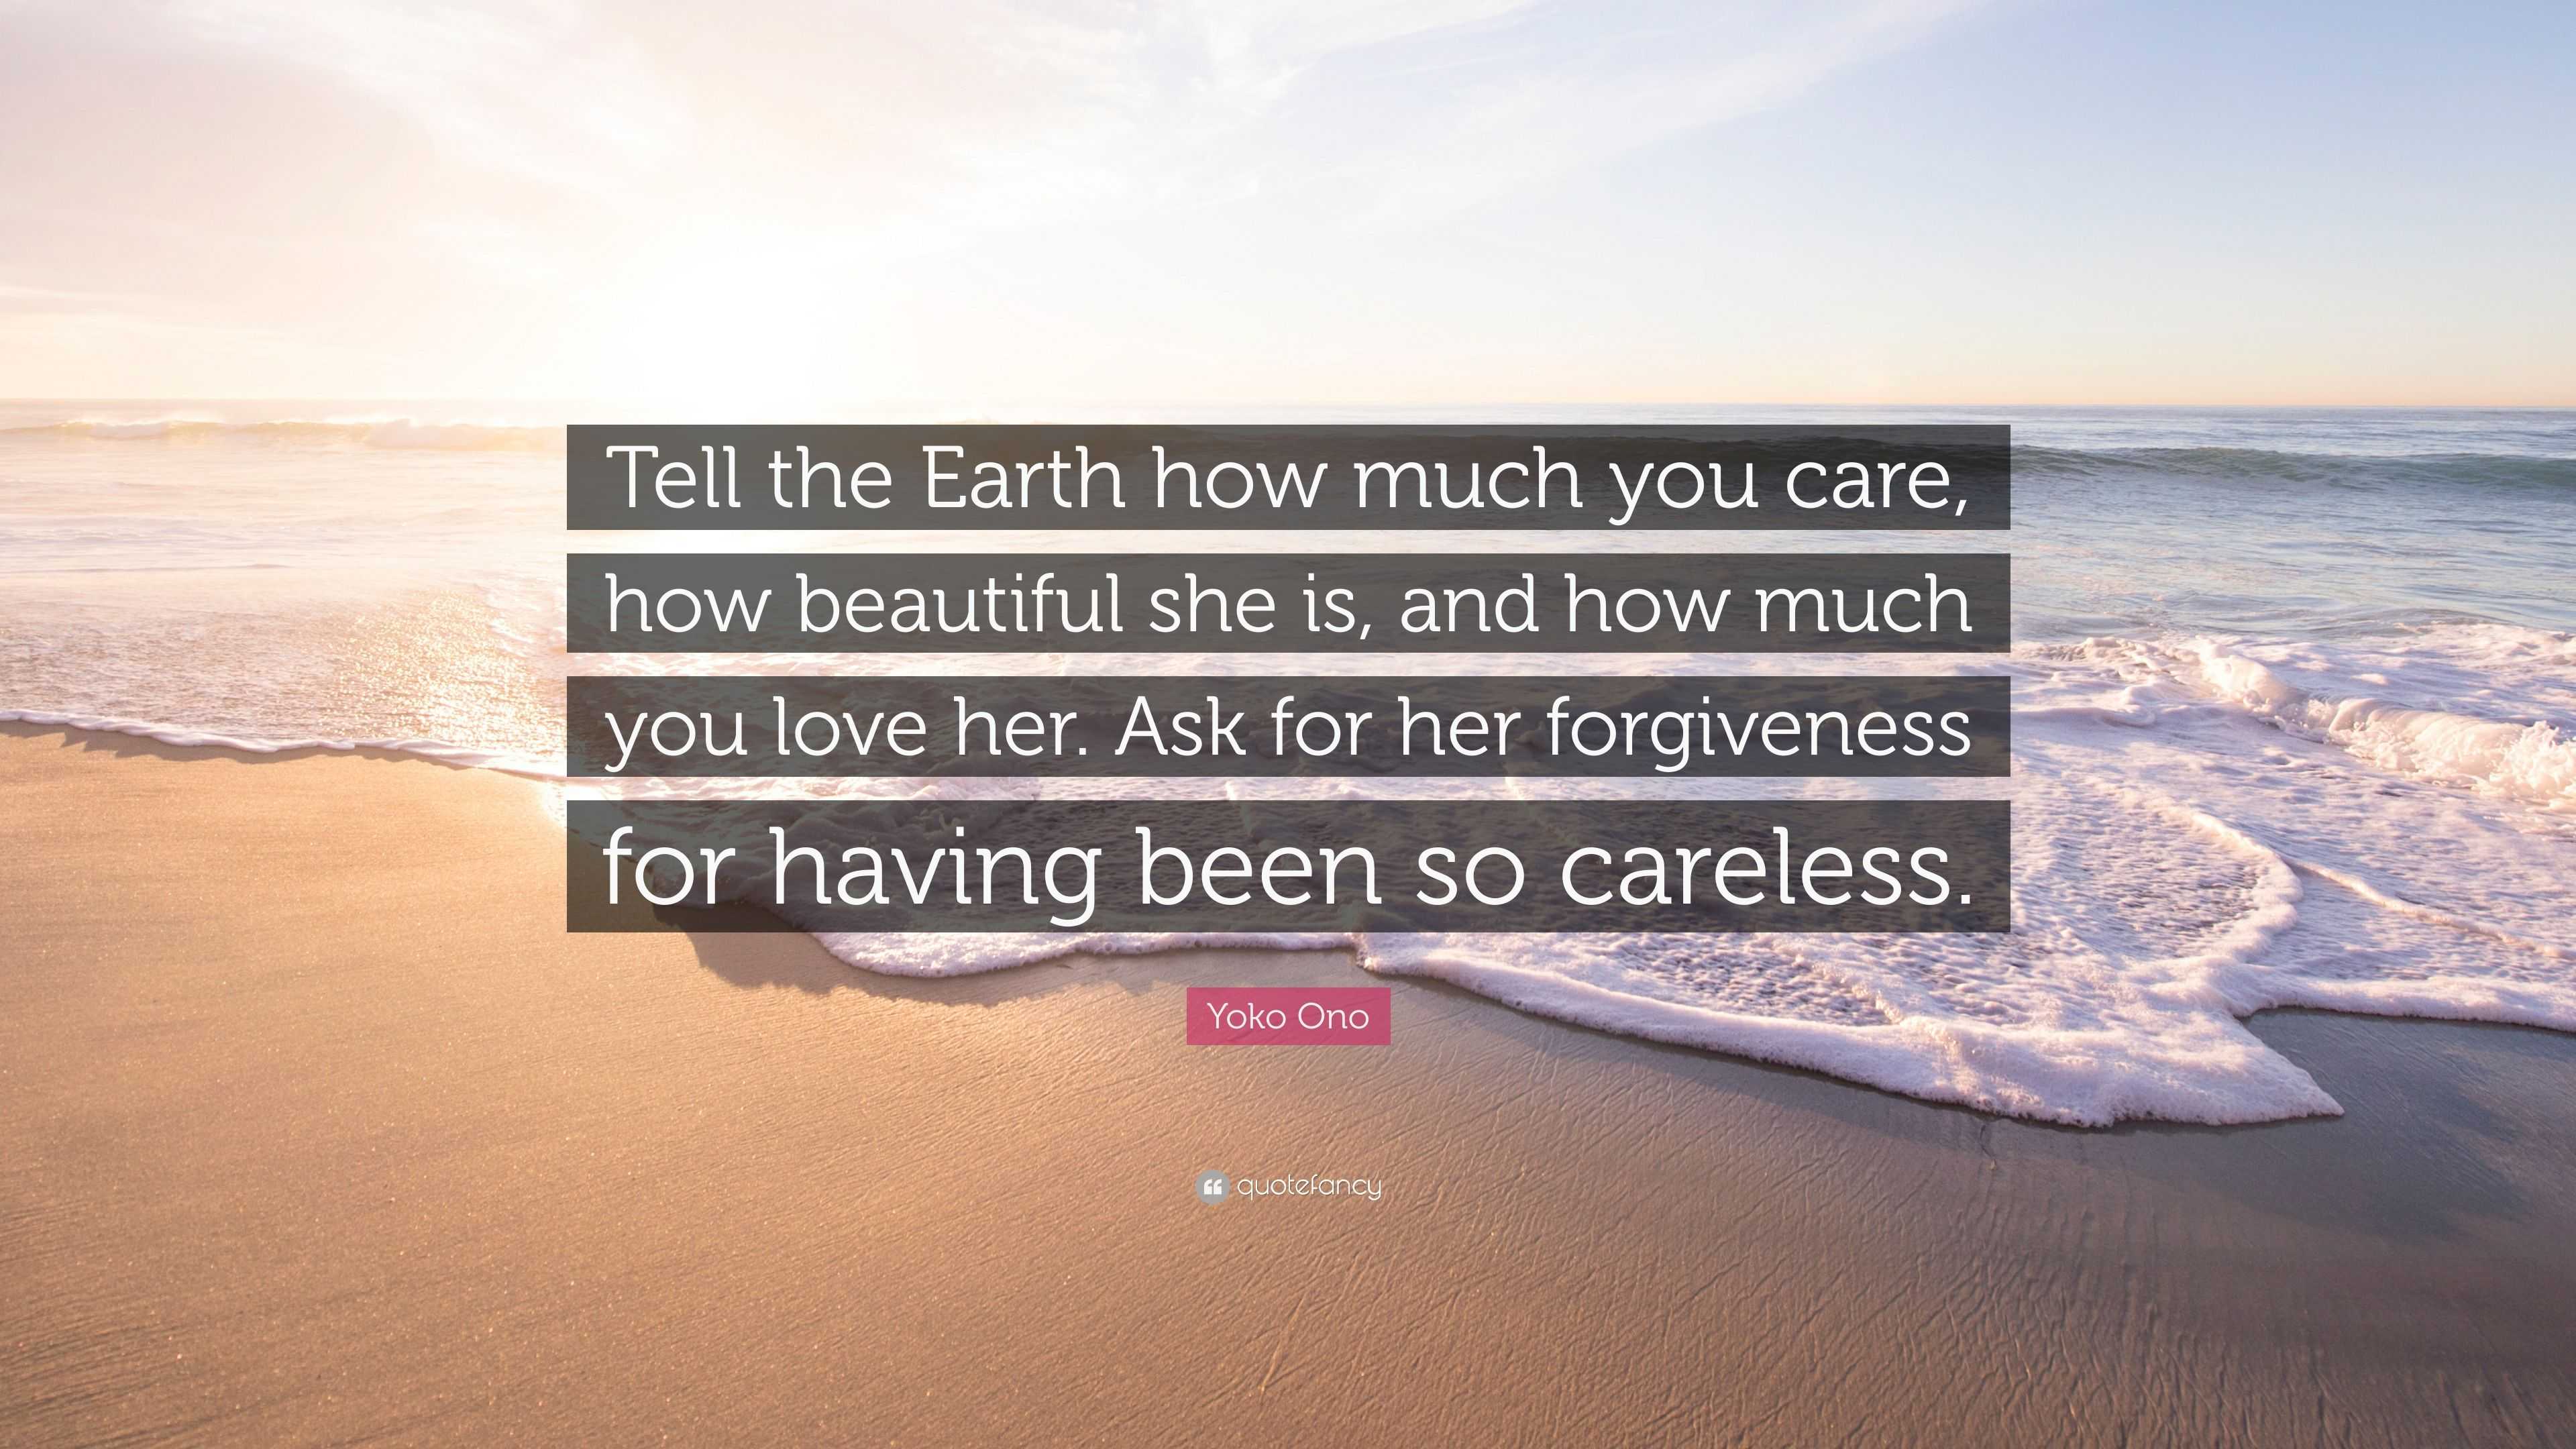 Yoko o Quote “Tell the Earth how much you care how beautiful she